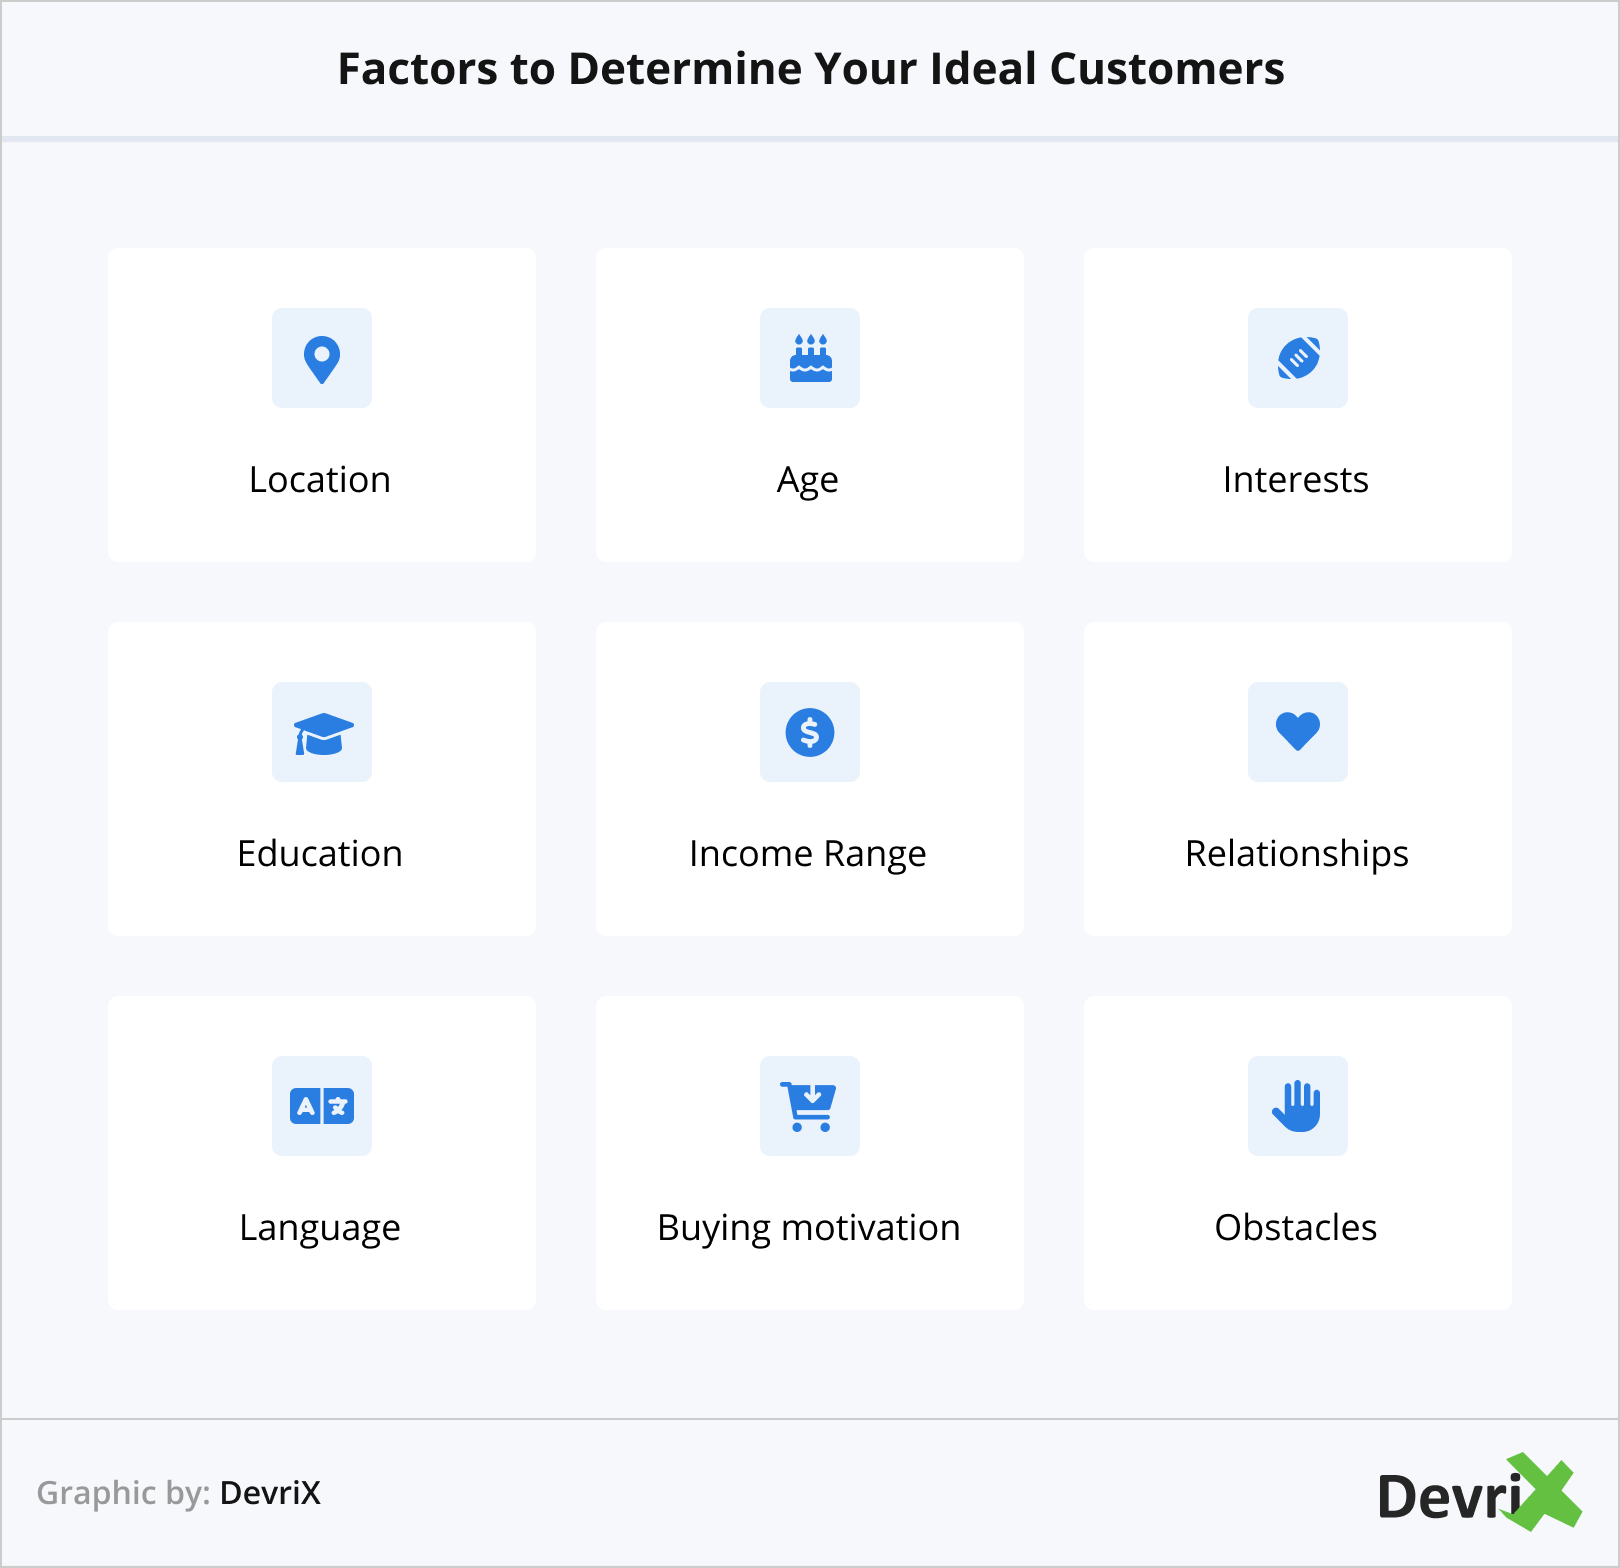 Factors to Determine Your Ideal Customers